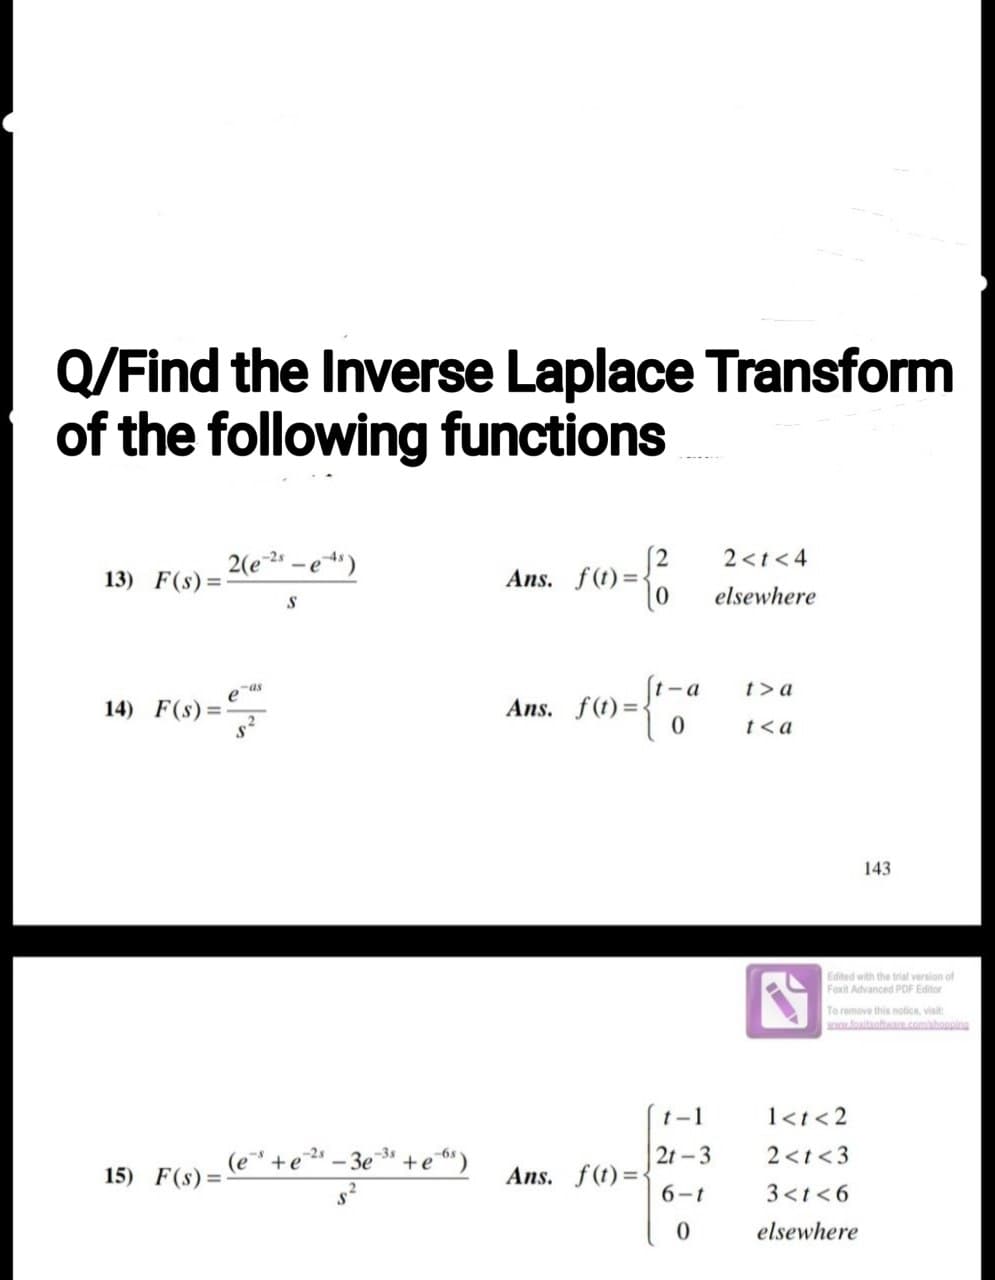 Q/Find the Inverse Laplace Transform
of the following functions
13) F(s) =
14) F(s)=
=
15) F(s) =
2(e-2s
-as
S
-2s
(e²" + e¹³ - 3e"
+e6s)
10 = to
Ans. f(t)=-
s={17
0
Ans. f(t)=-
Ans. f(t)=-
-a
t-1
2t-3
6-1
0
2<t<4
elsewhere
t> a
t<a
Edited with the trial version of
Foxit Advanced PDF Editor
143.
To remove this notice, visit:
www.foxitsoftware.com/shopping
1<t <2
2<t <3
3<t<6
elsewhere